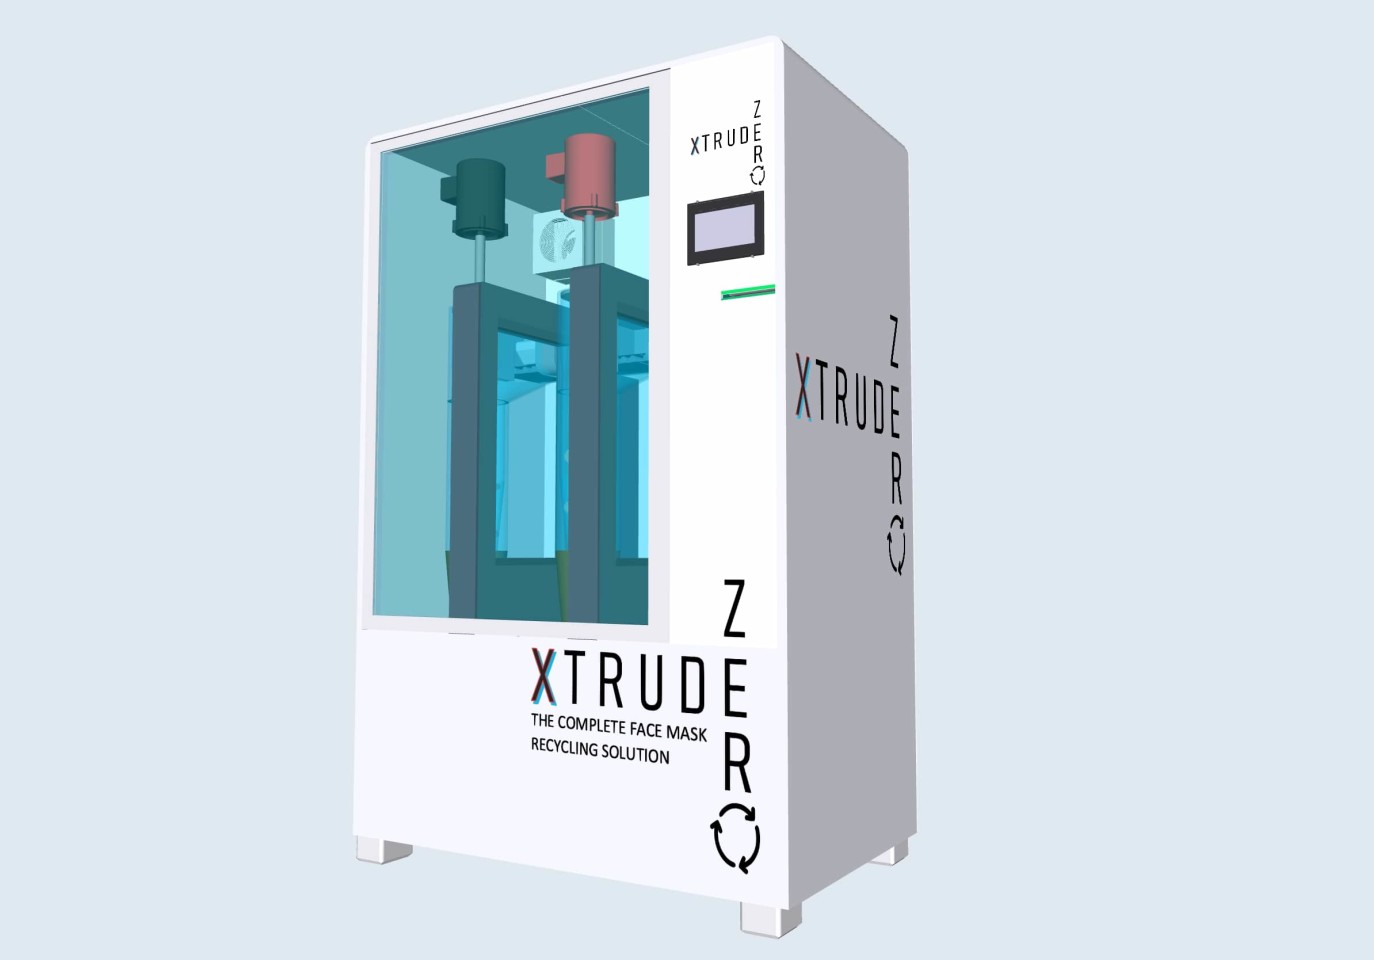 The James Dyson Award 2021 national winner of Poland is the Xtrude Zero, a machine that recycles face masks into plastic pellets